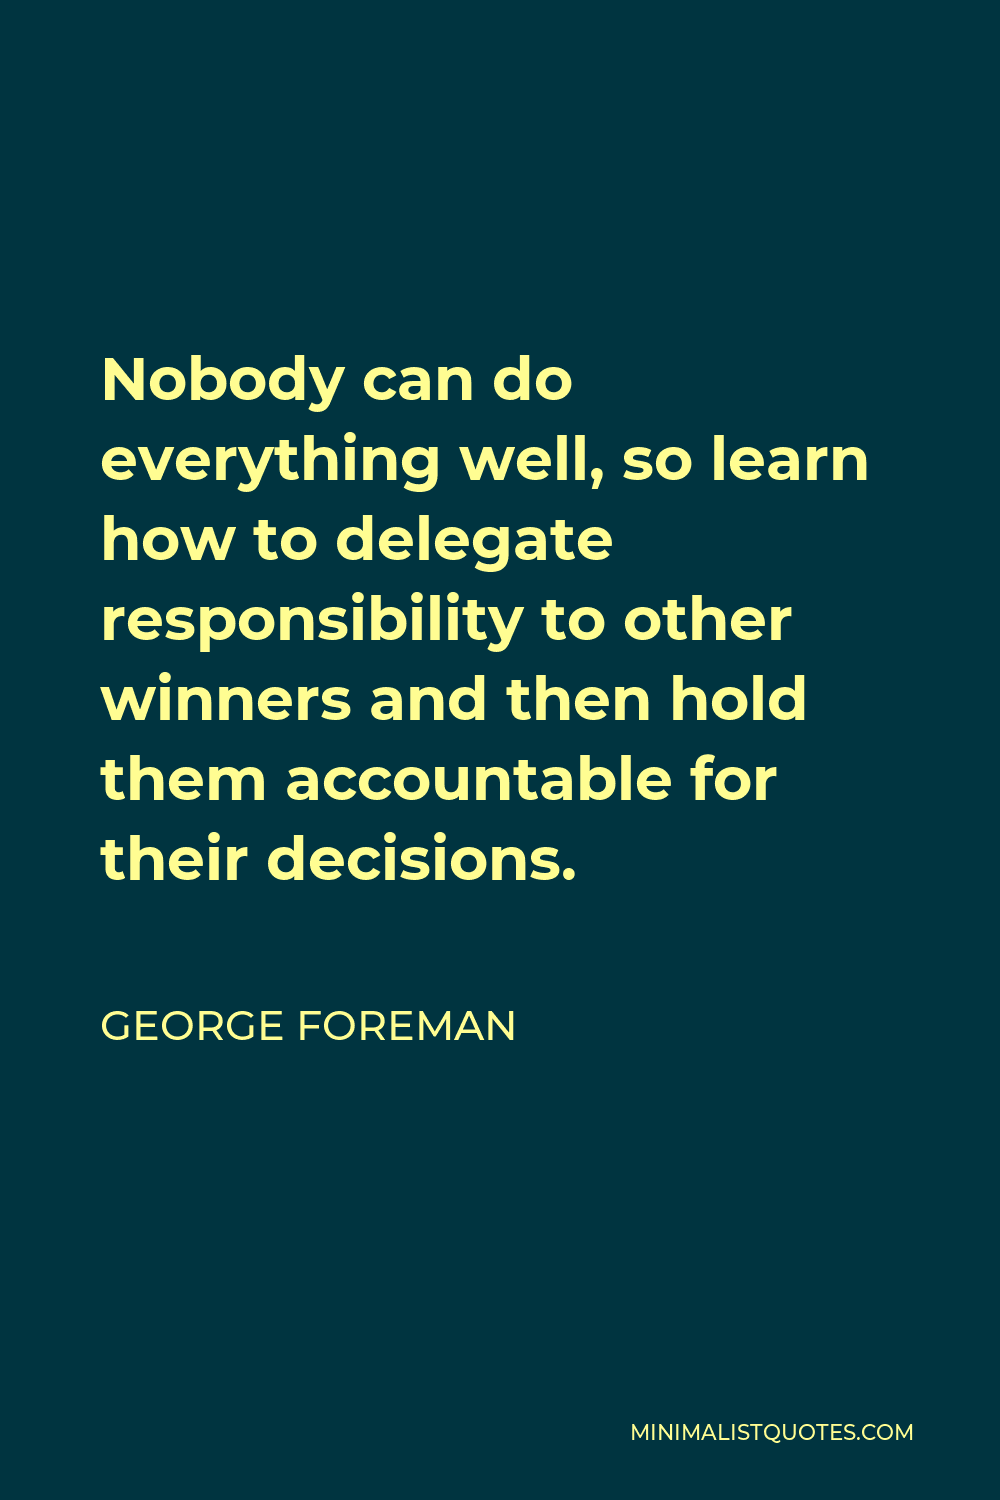 George Foreman Quote - Nobody can do everything well, so learn how to delegate responsibility to other winners and then hold them accountable for their decisions.